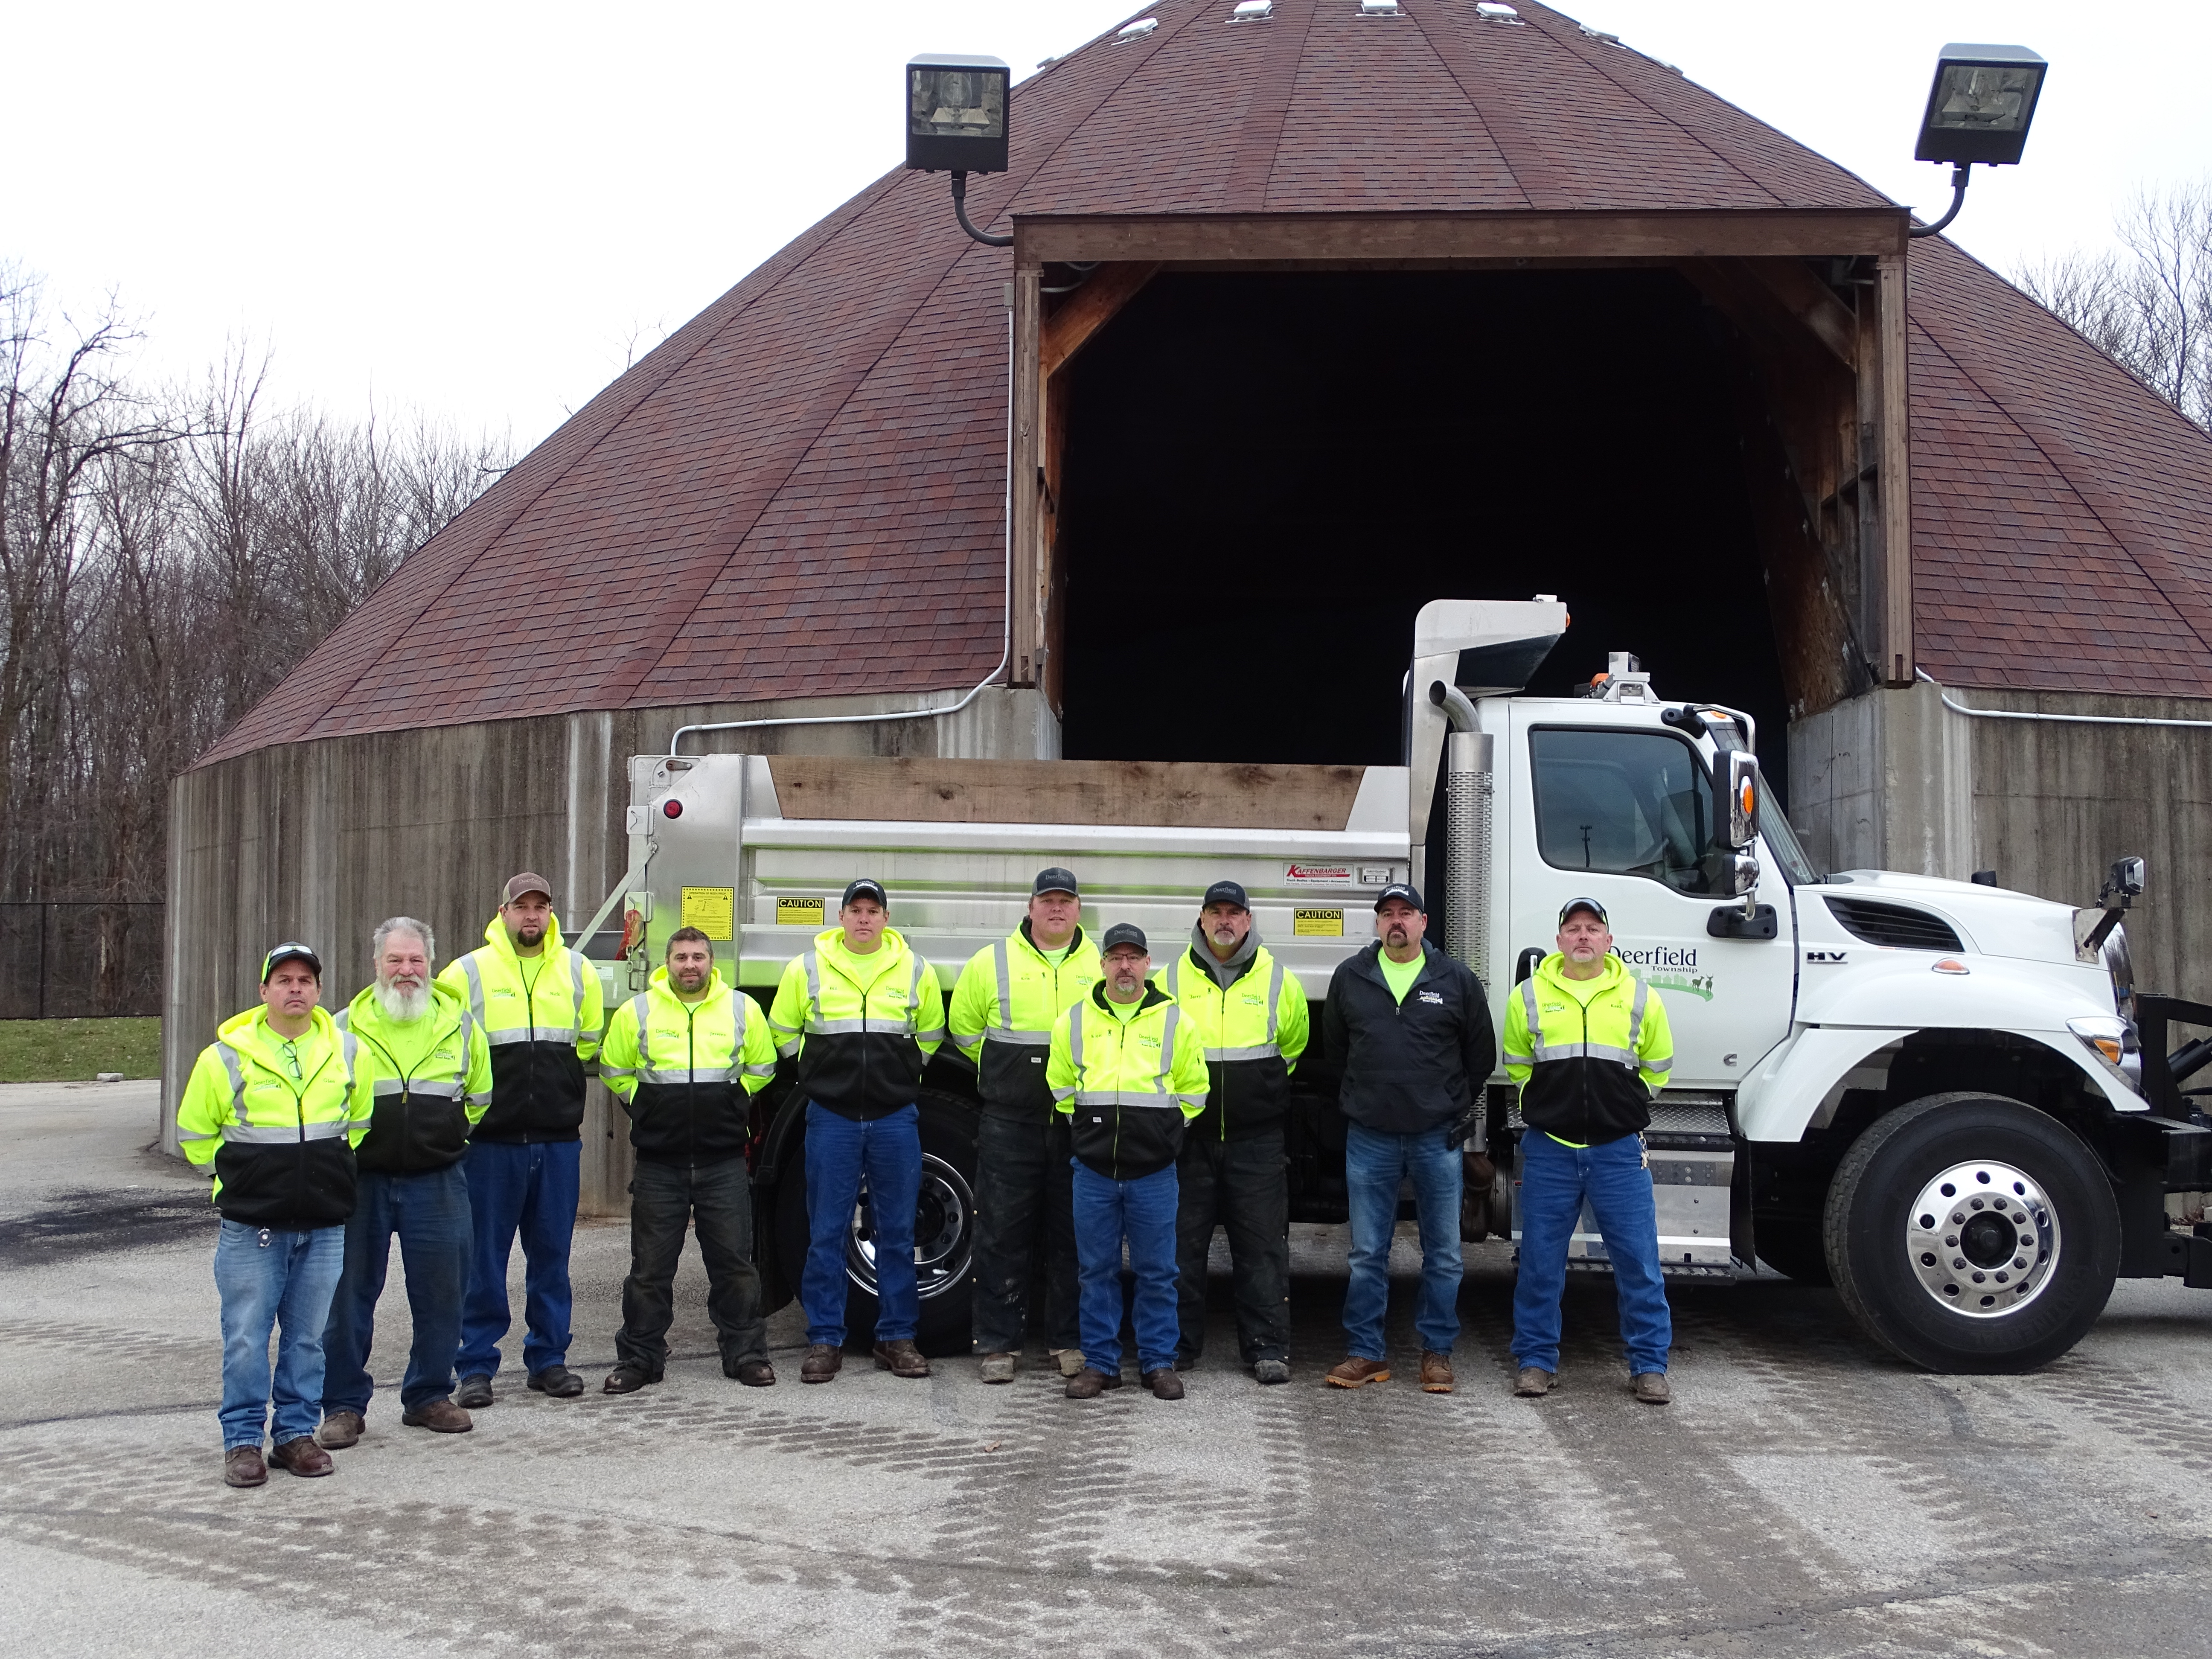 Workers in front of salt barn and snow plow